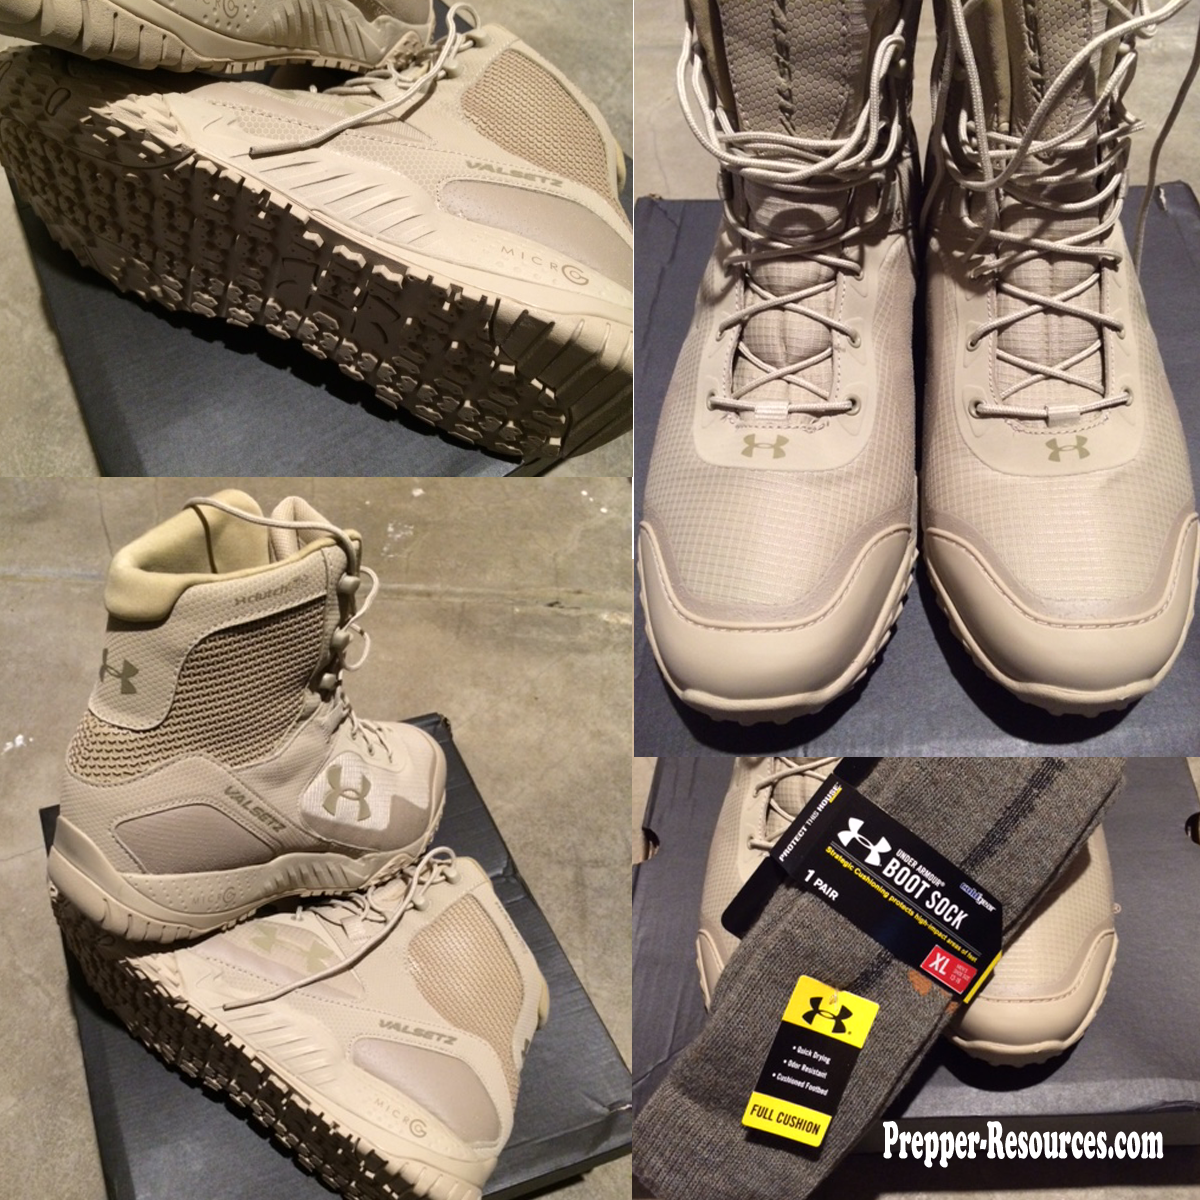 under armour tactical boots review